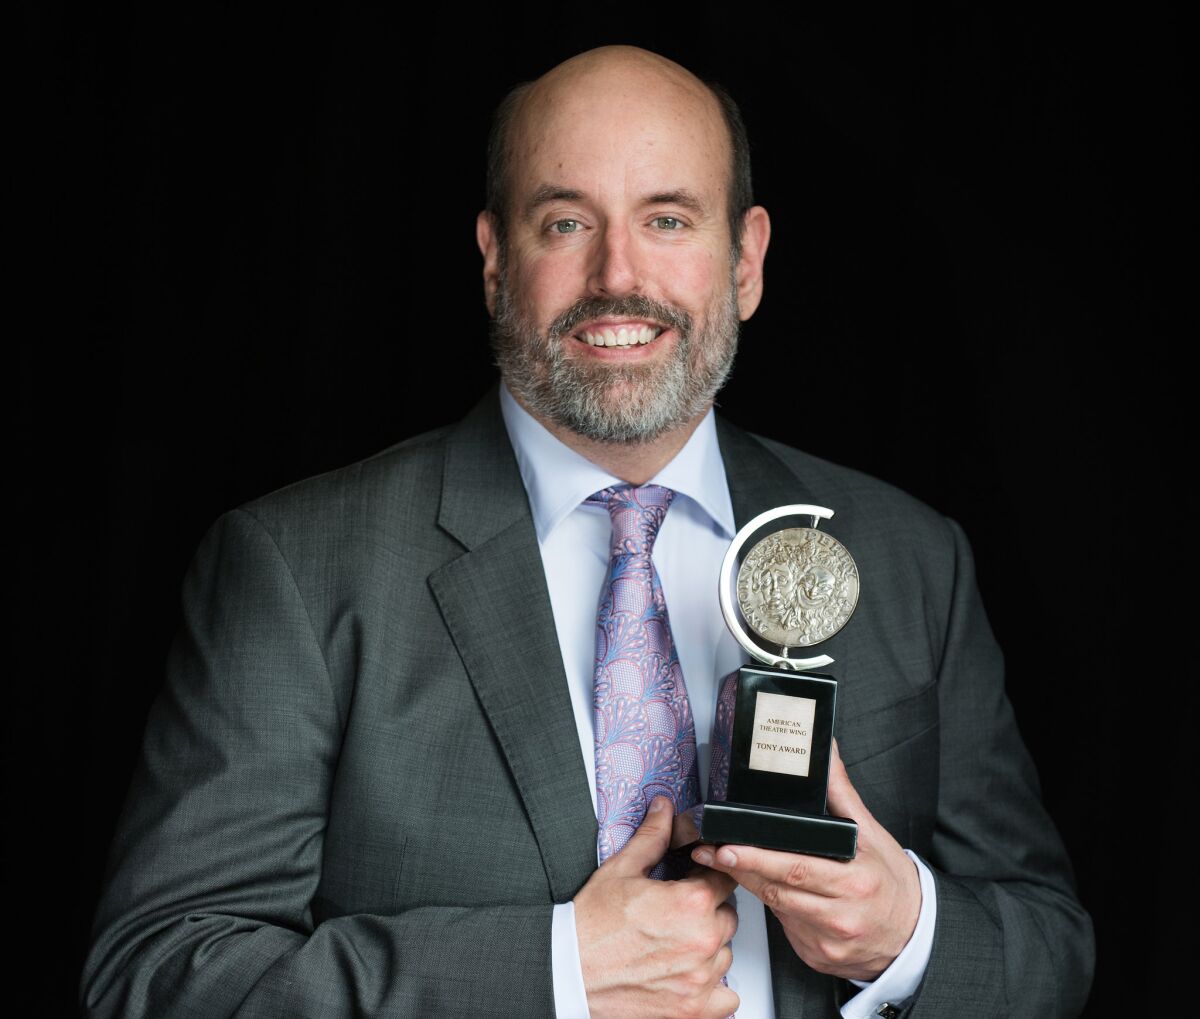 La Jolla Playhouse artistic director Christopher Ashley with his Tony Award for directing "Come from Away."